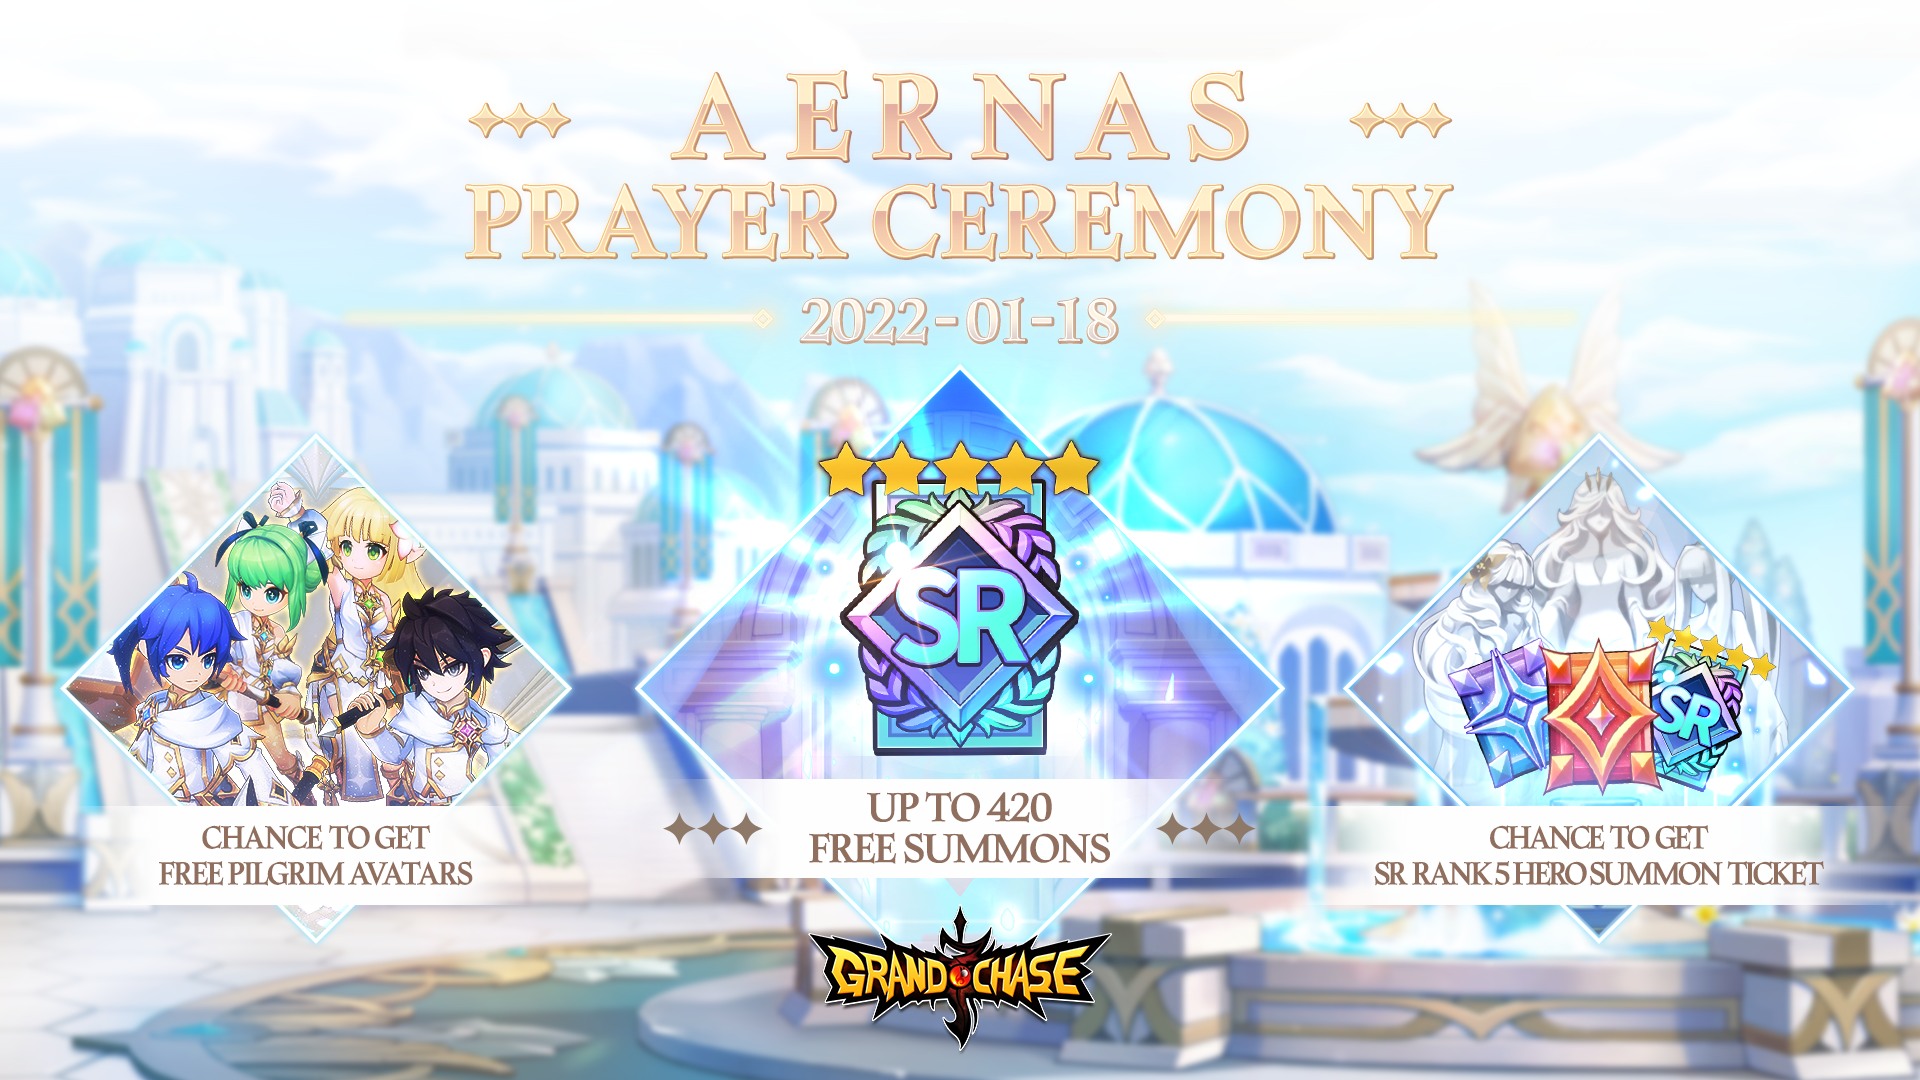 GrandChase Mobile celebrates the Biggest Event of the year – Aernas Prayer Ceremony